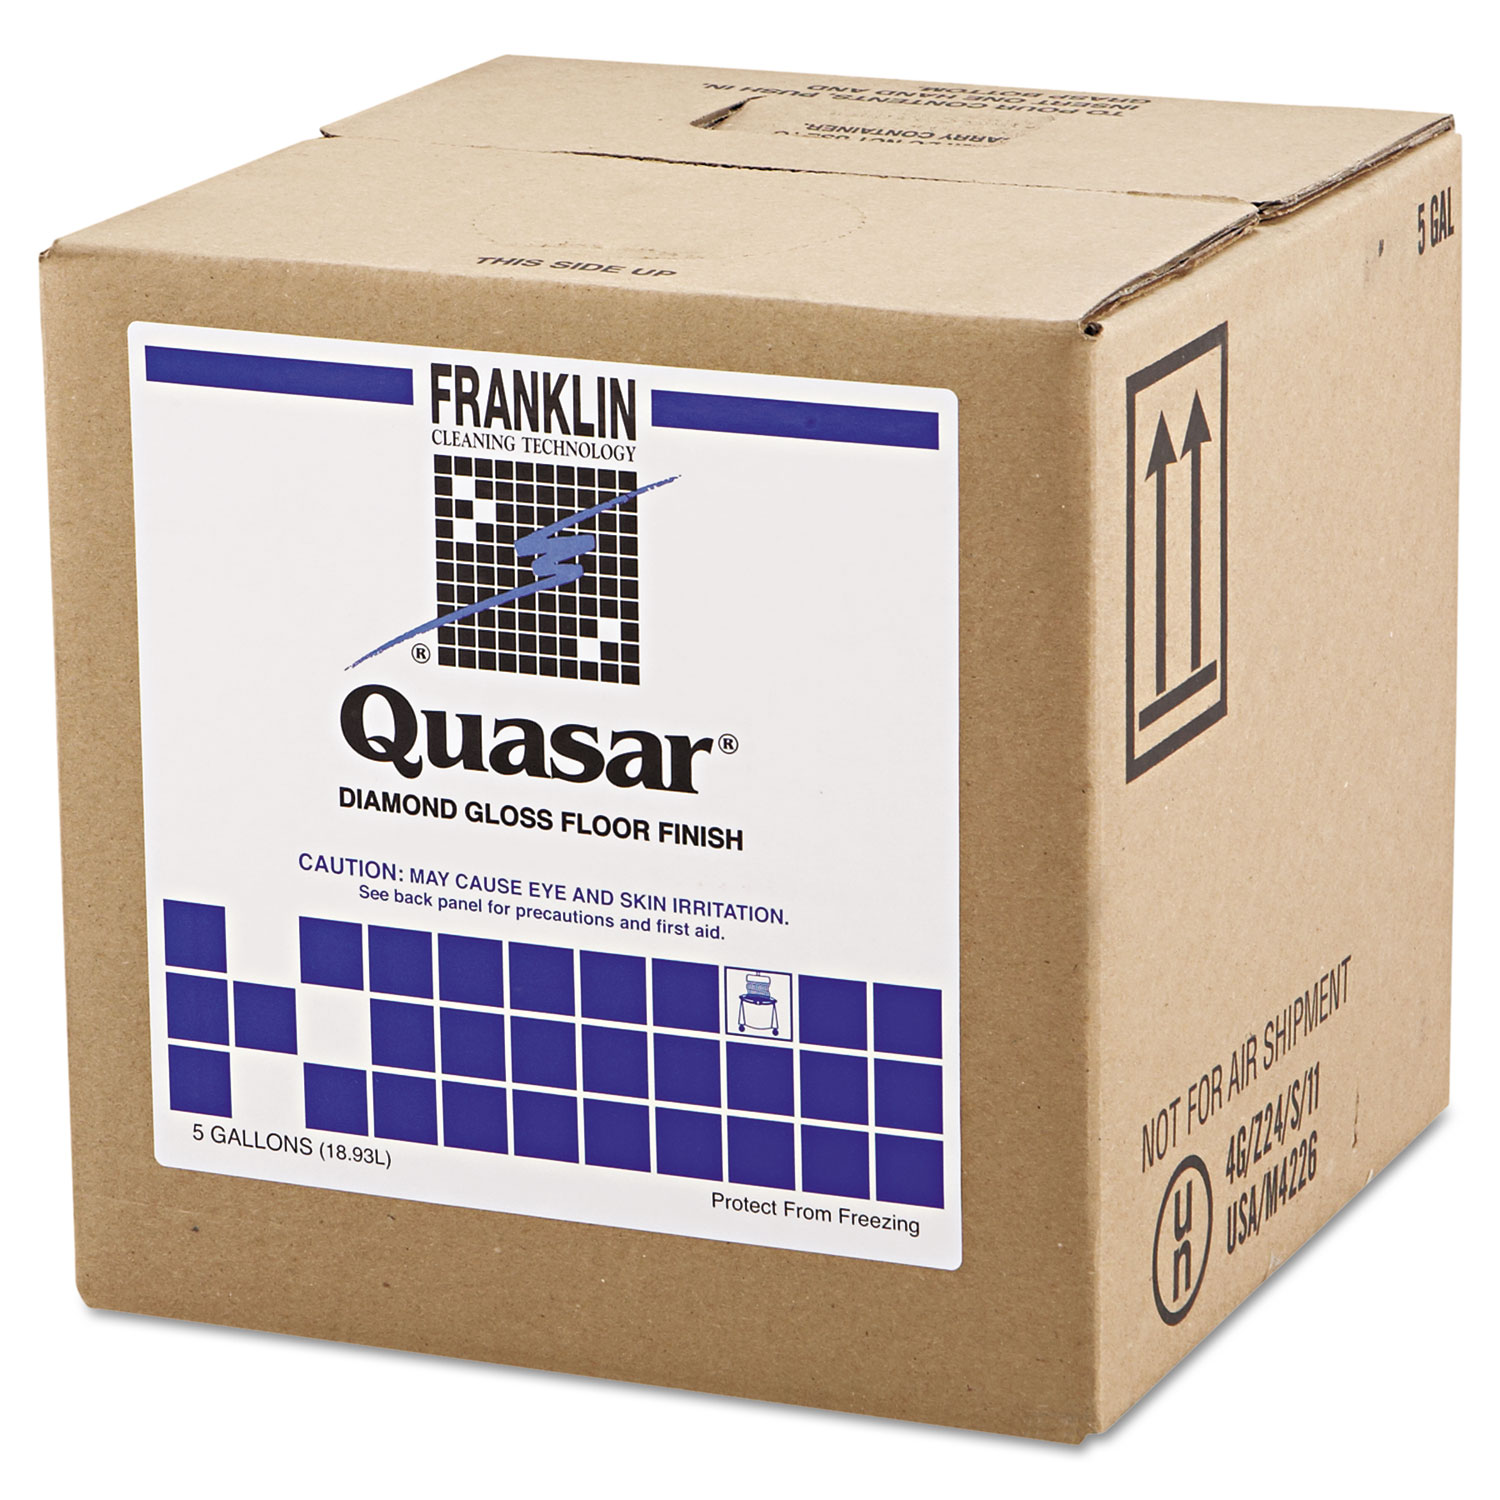 Franklin Cleaning Technology® Quasar High Solids Floor Finish, 5gal Box